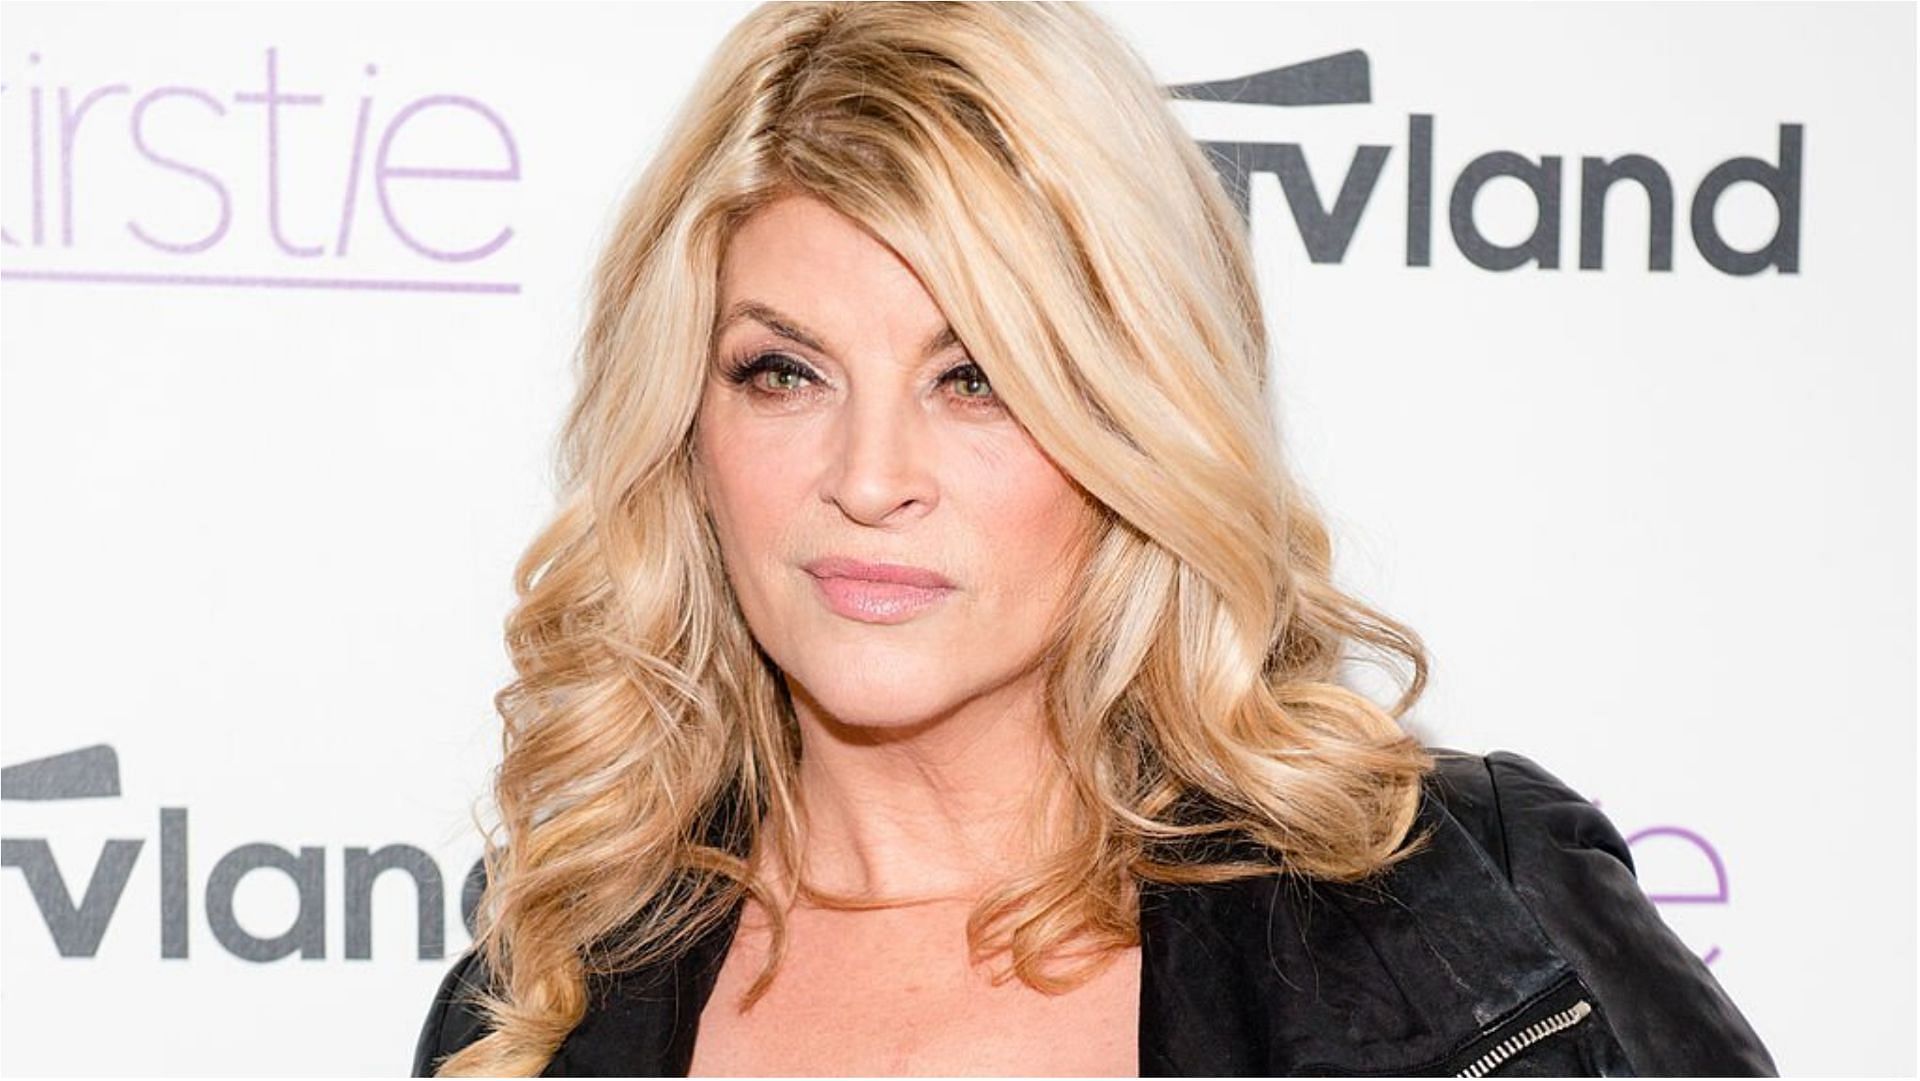 Kirstie Alley was 71 years old at the time of death (Image via Noam Galai/Getty Images)